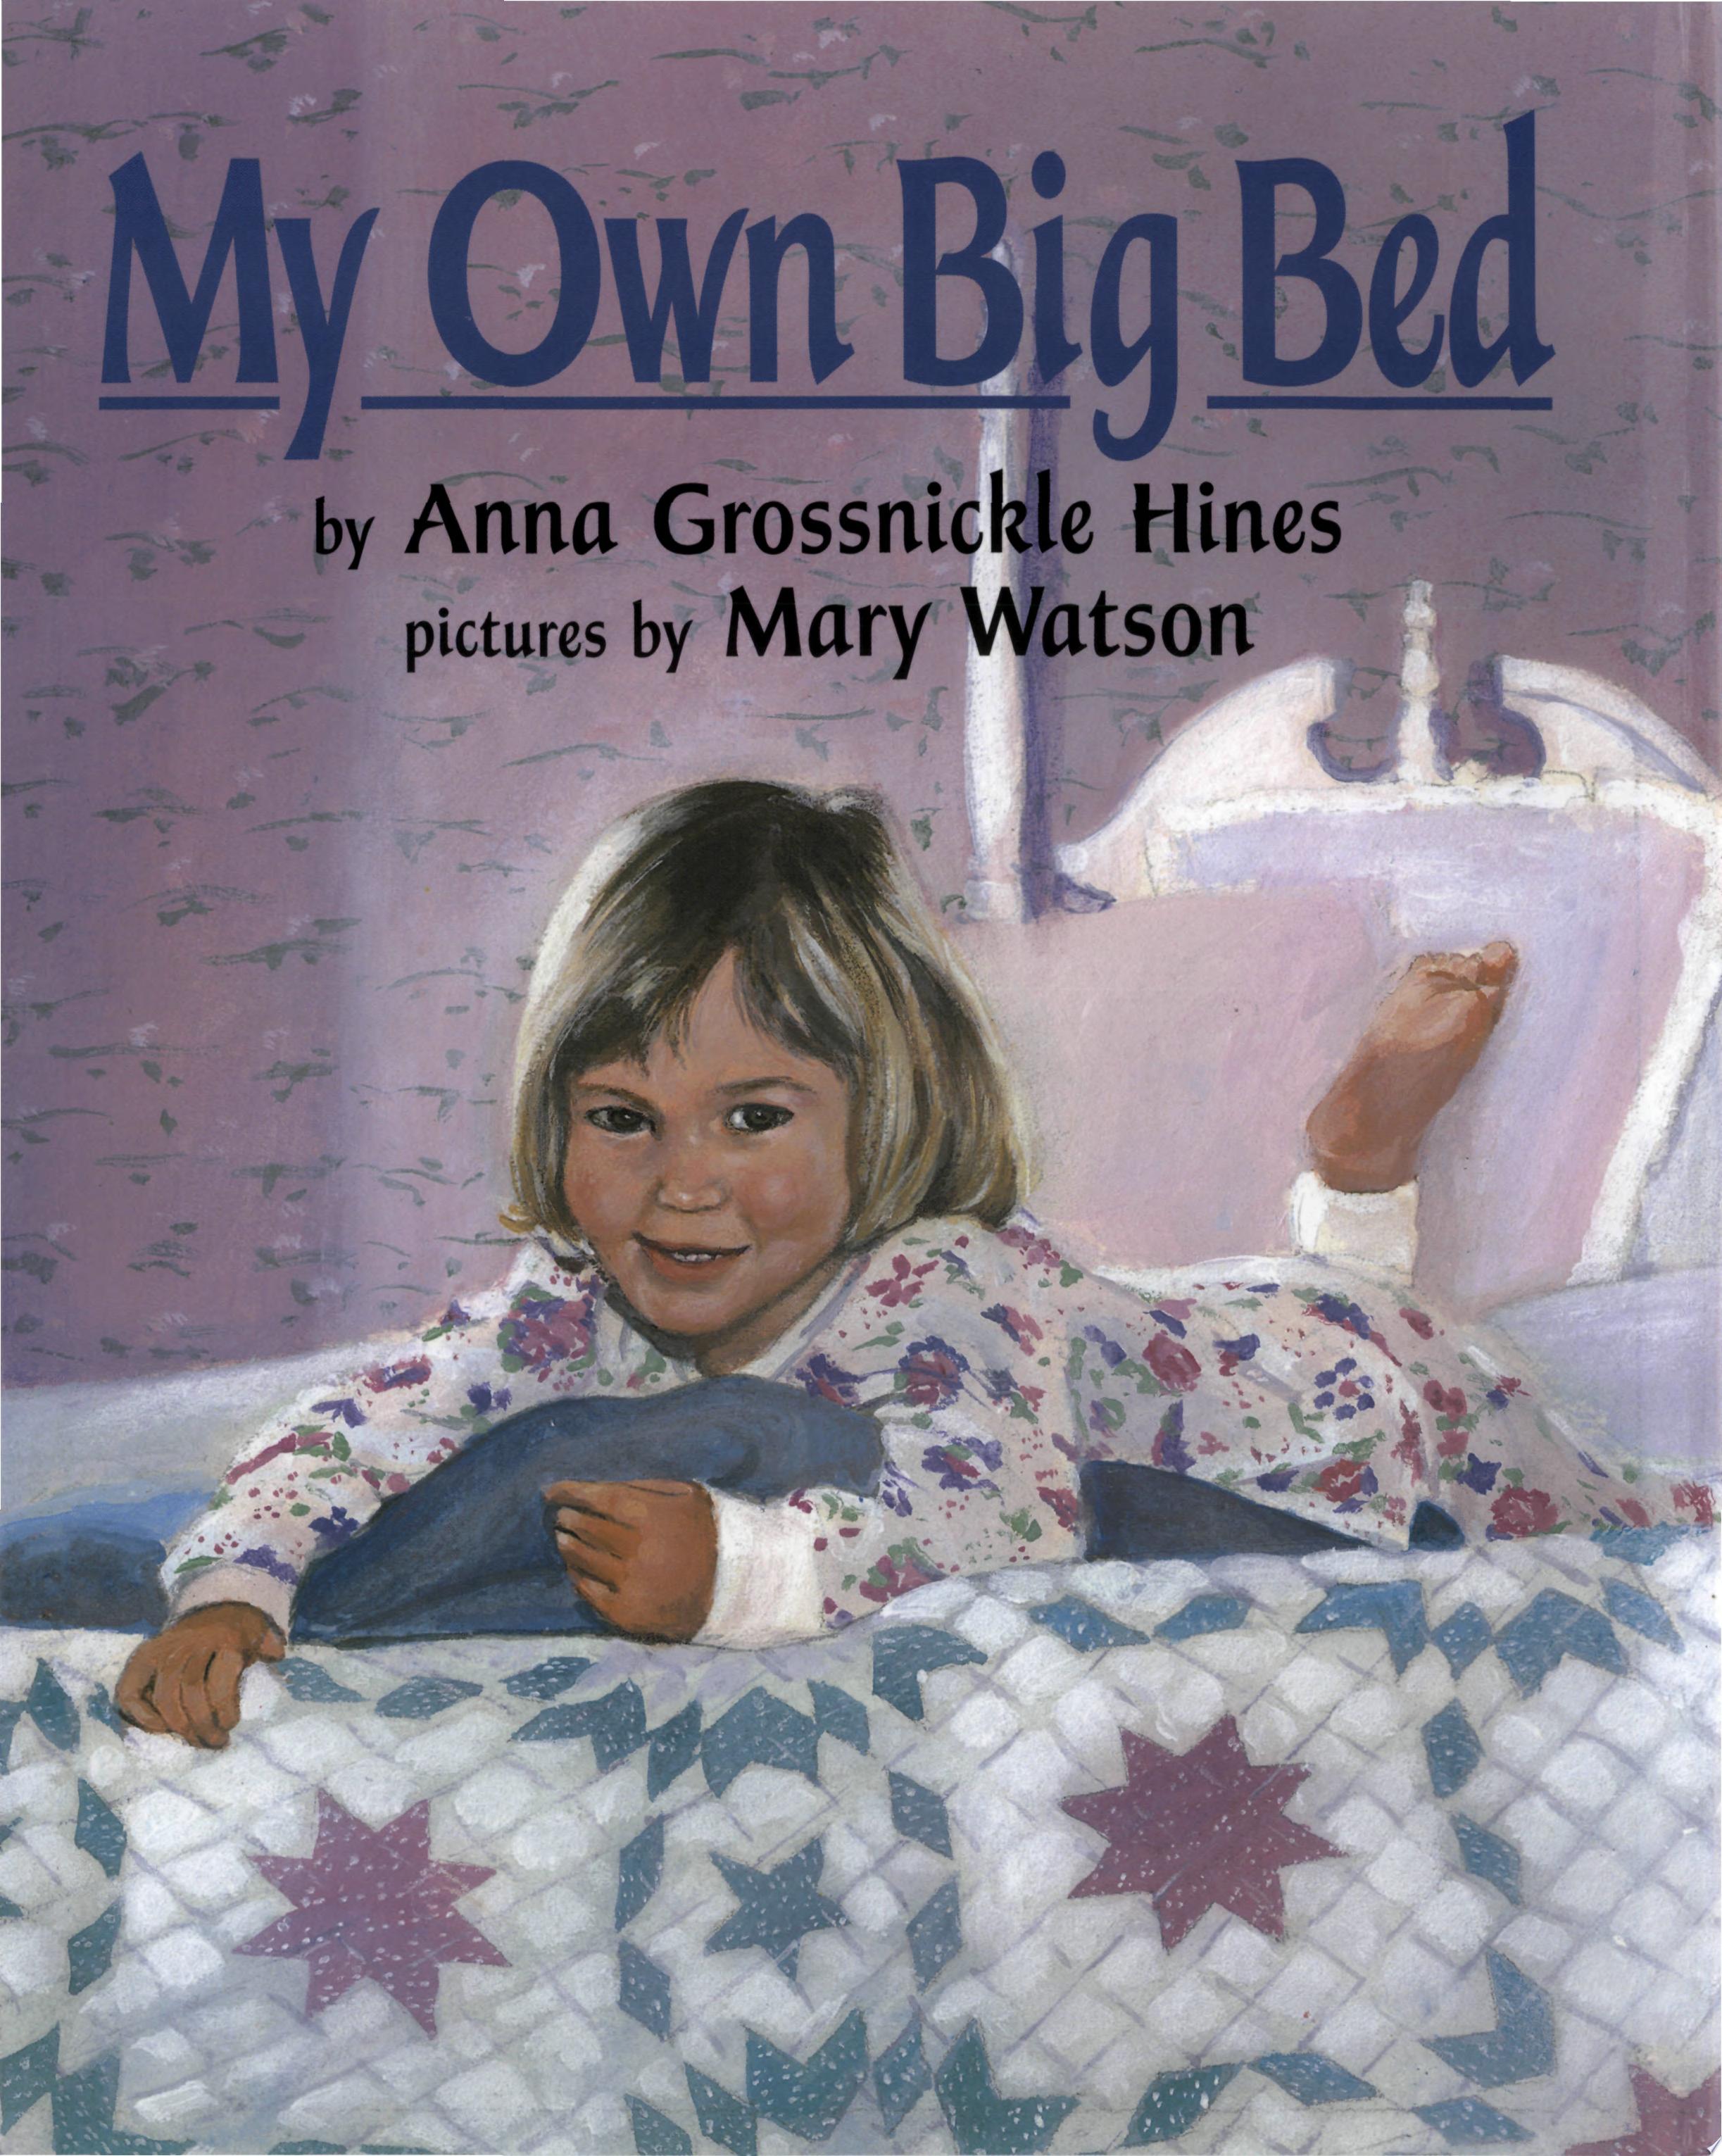 Image for "My Own Big Bed"